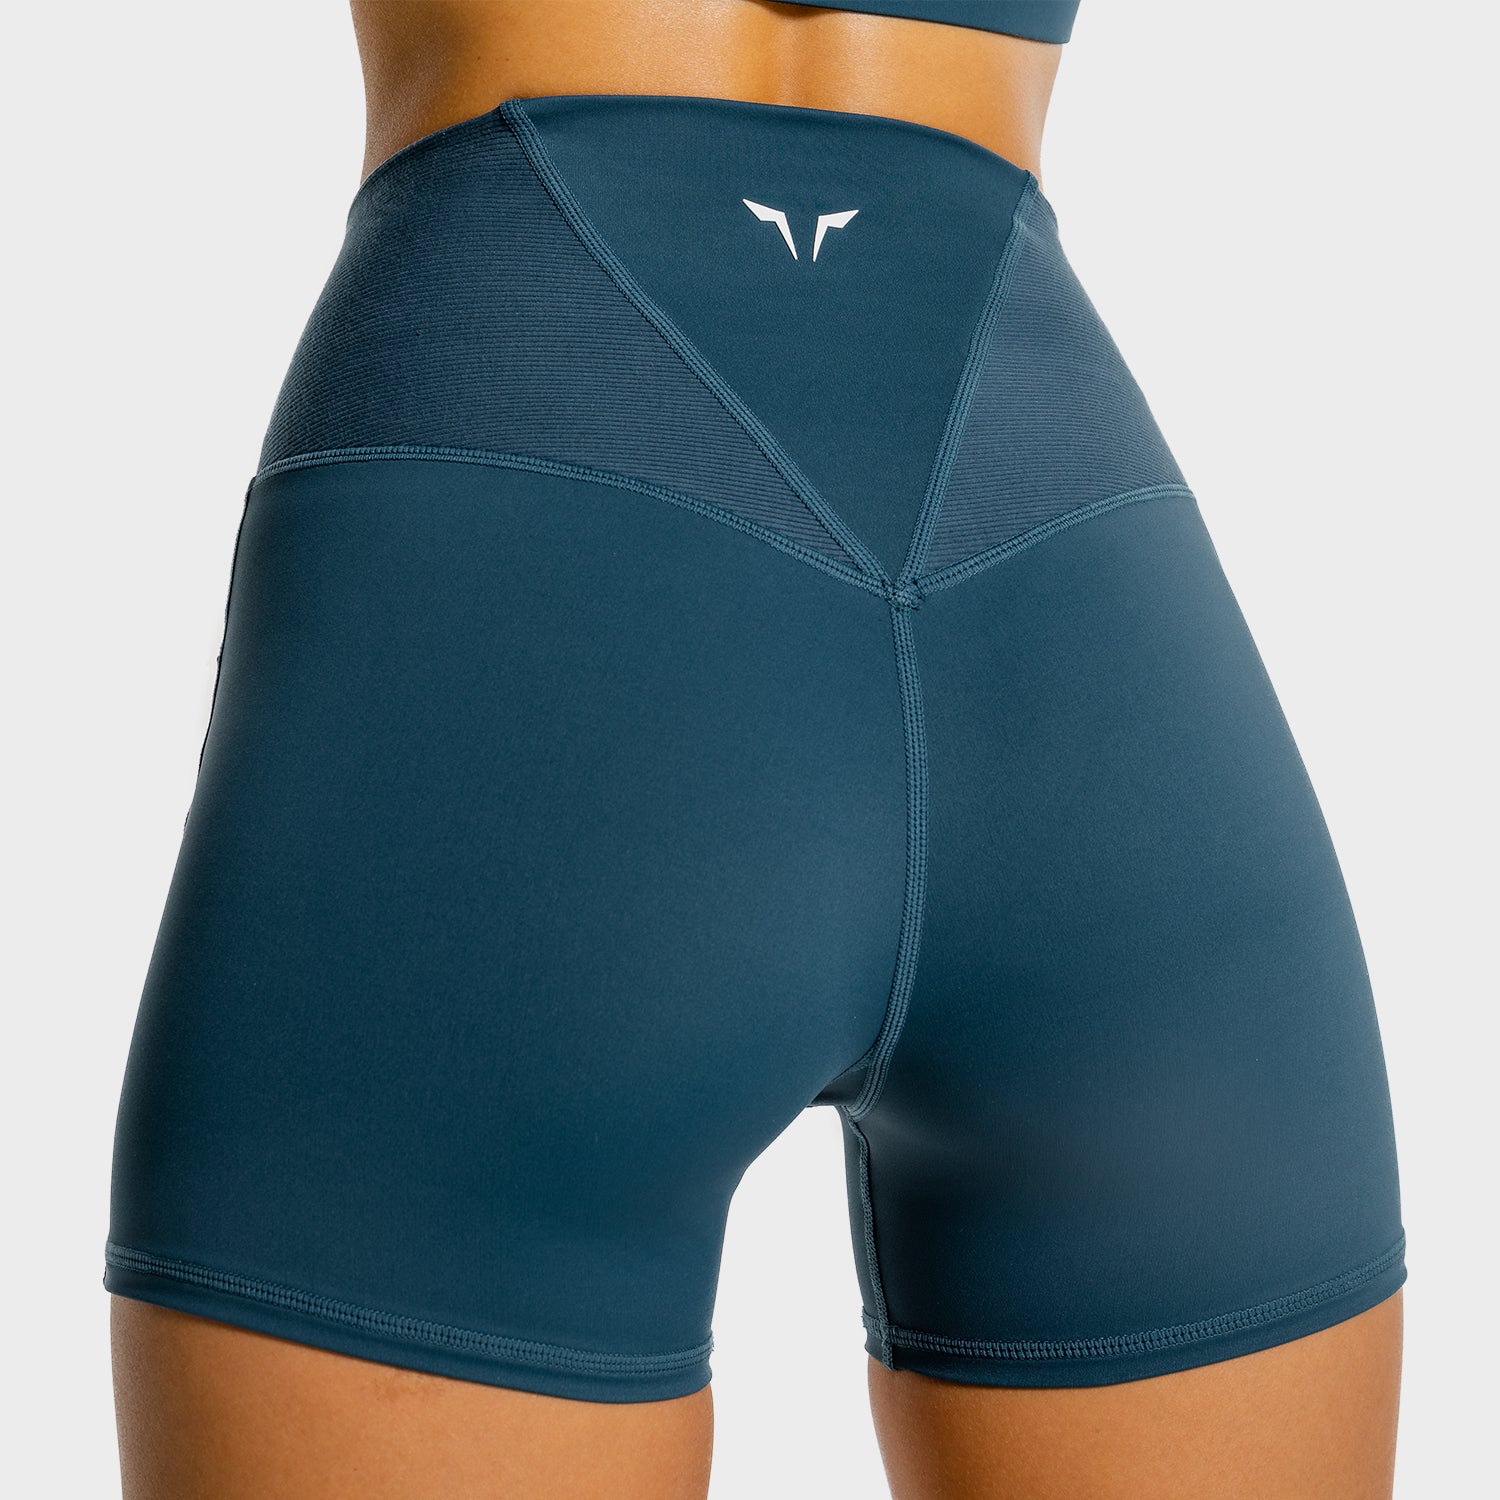 squatwolf-gym-shorts-for-women-core-performance-shorts-blue-workout-clothes